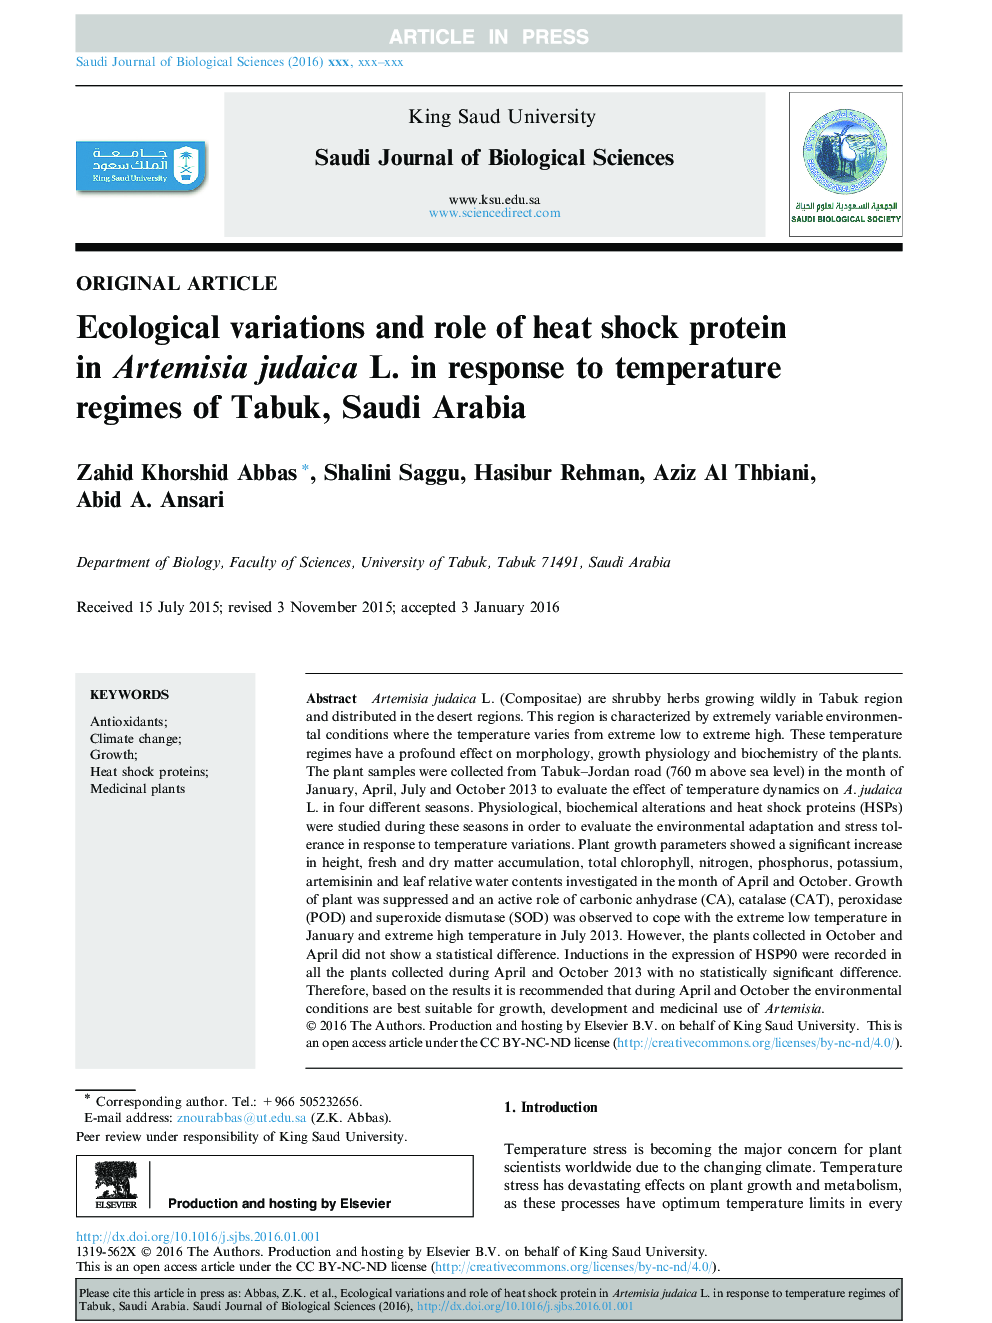 Ecological variations and role of heat shock protein in Artemisia judaica L. in response to temperature regimes of Tabuk, Saudi Arabia